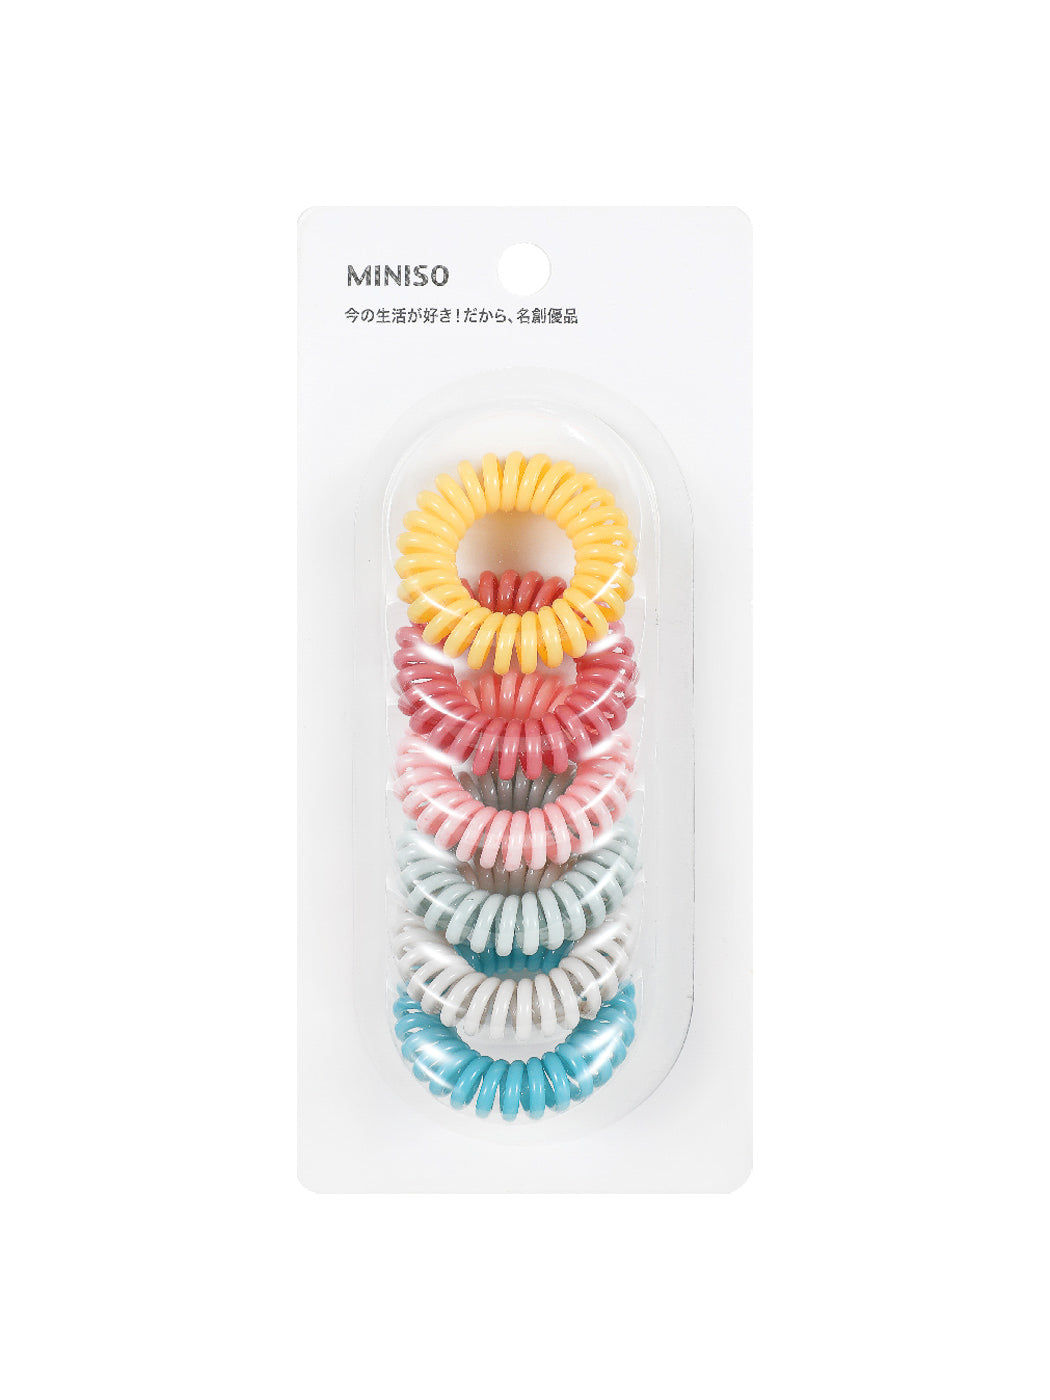 MINISO 3.5 COLORED SPIRAL HAIR TIES ( 6PCS ) 2007225010102 HAIR TIE